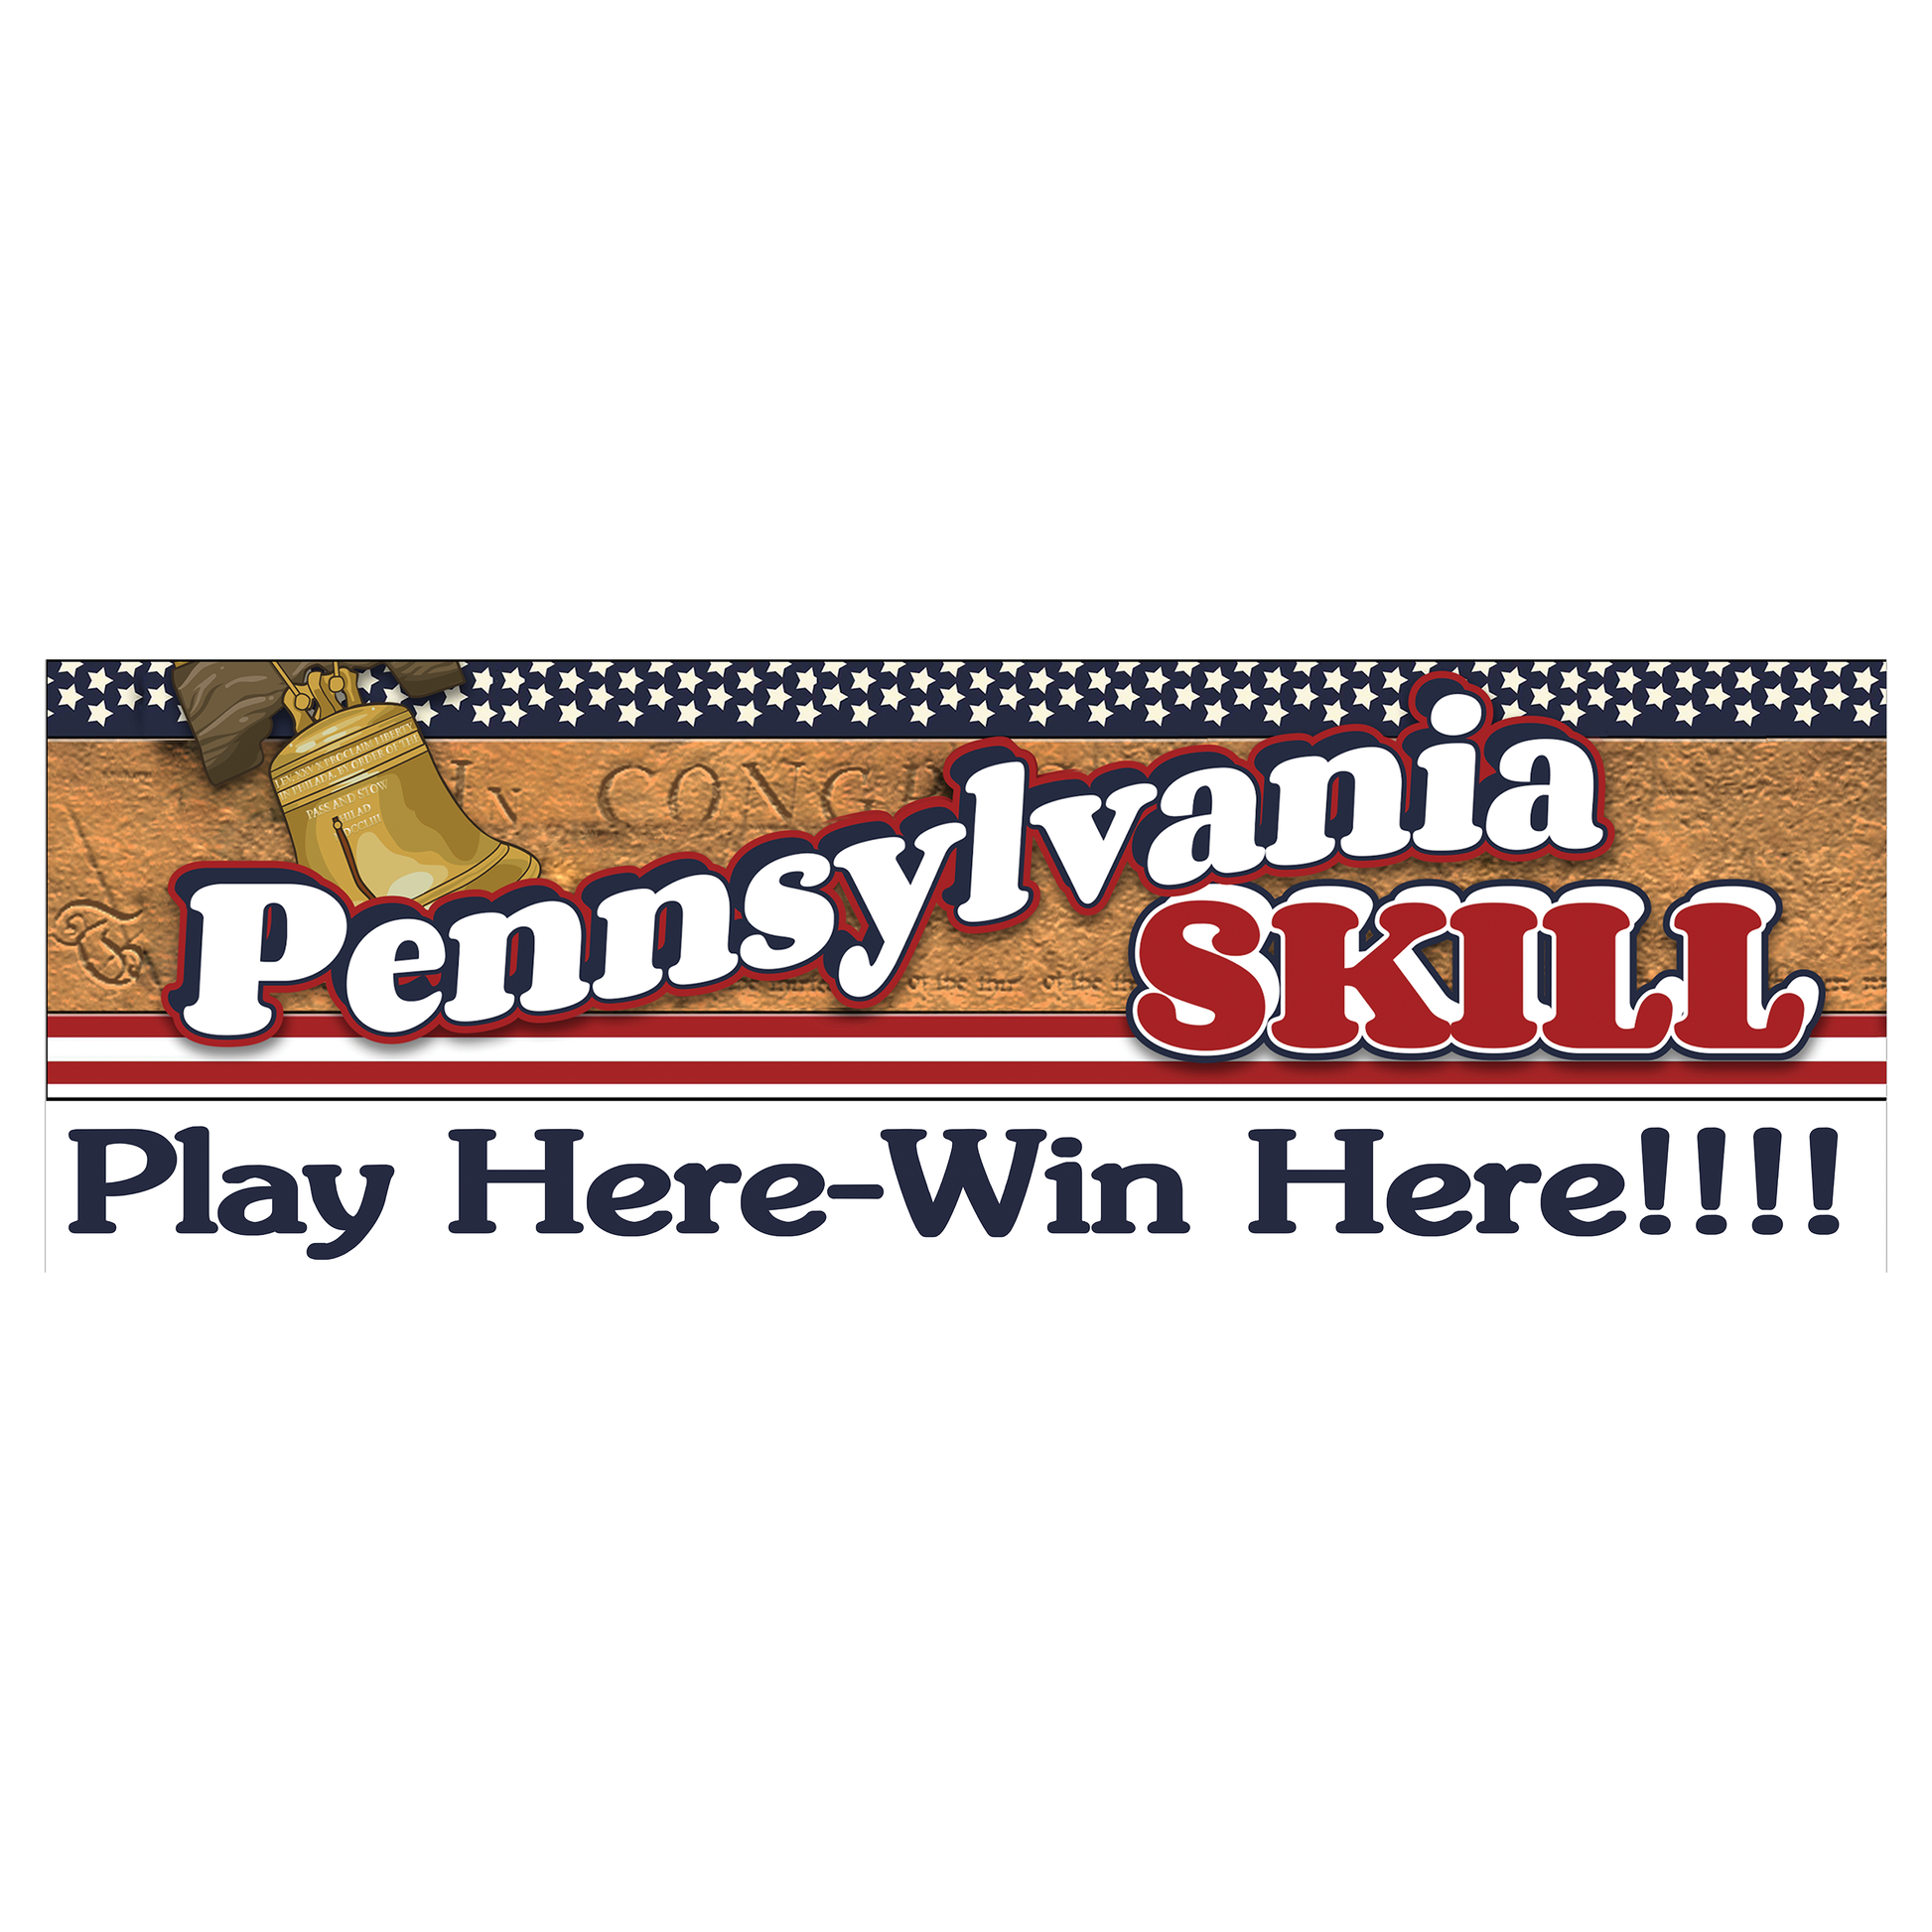 Promote your Pennsylvania Skill game(s) with a “Play Here/Win Here” Banner to market your location to the public.  Size: 6’ W x 2’ H. Sold by Miele Manufacturing.